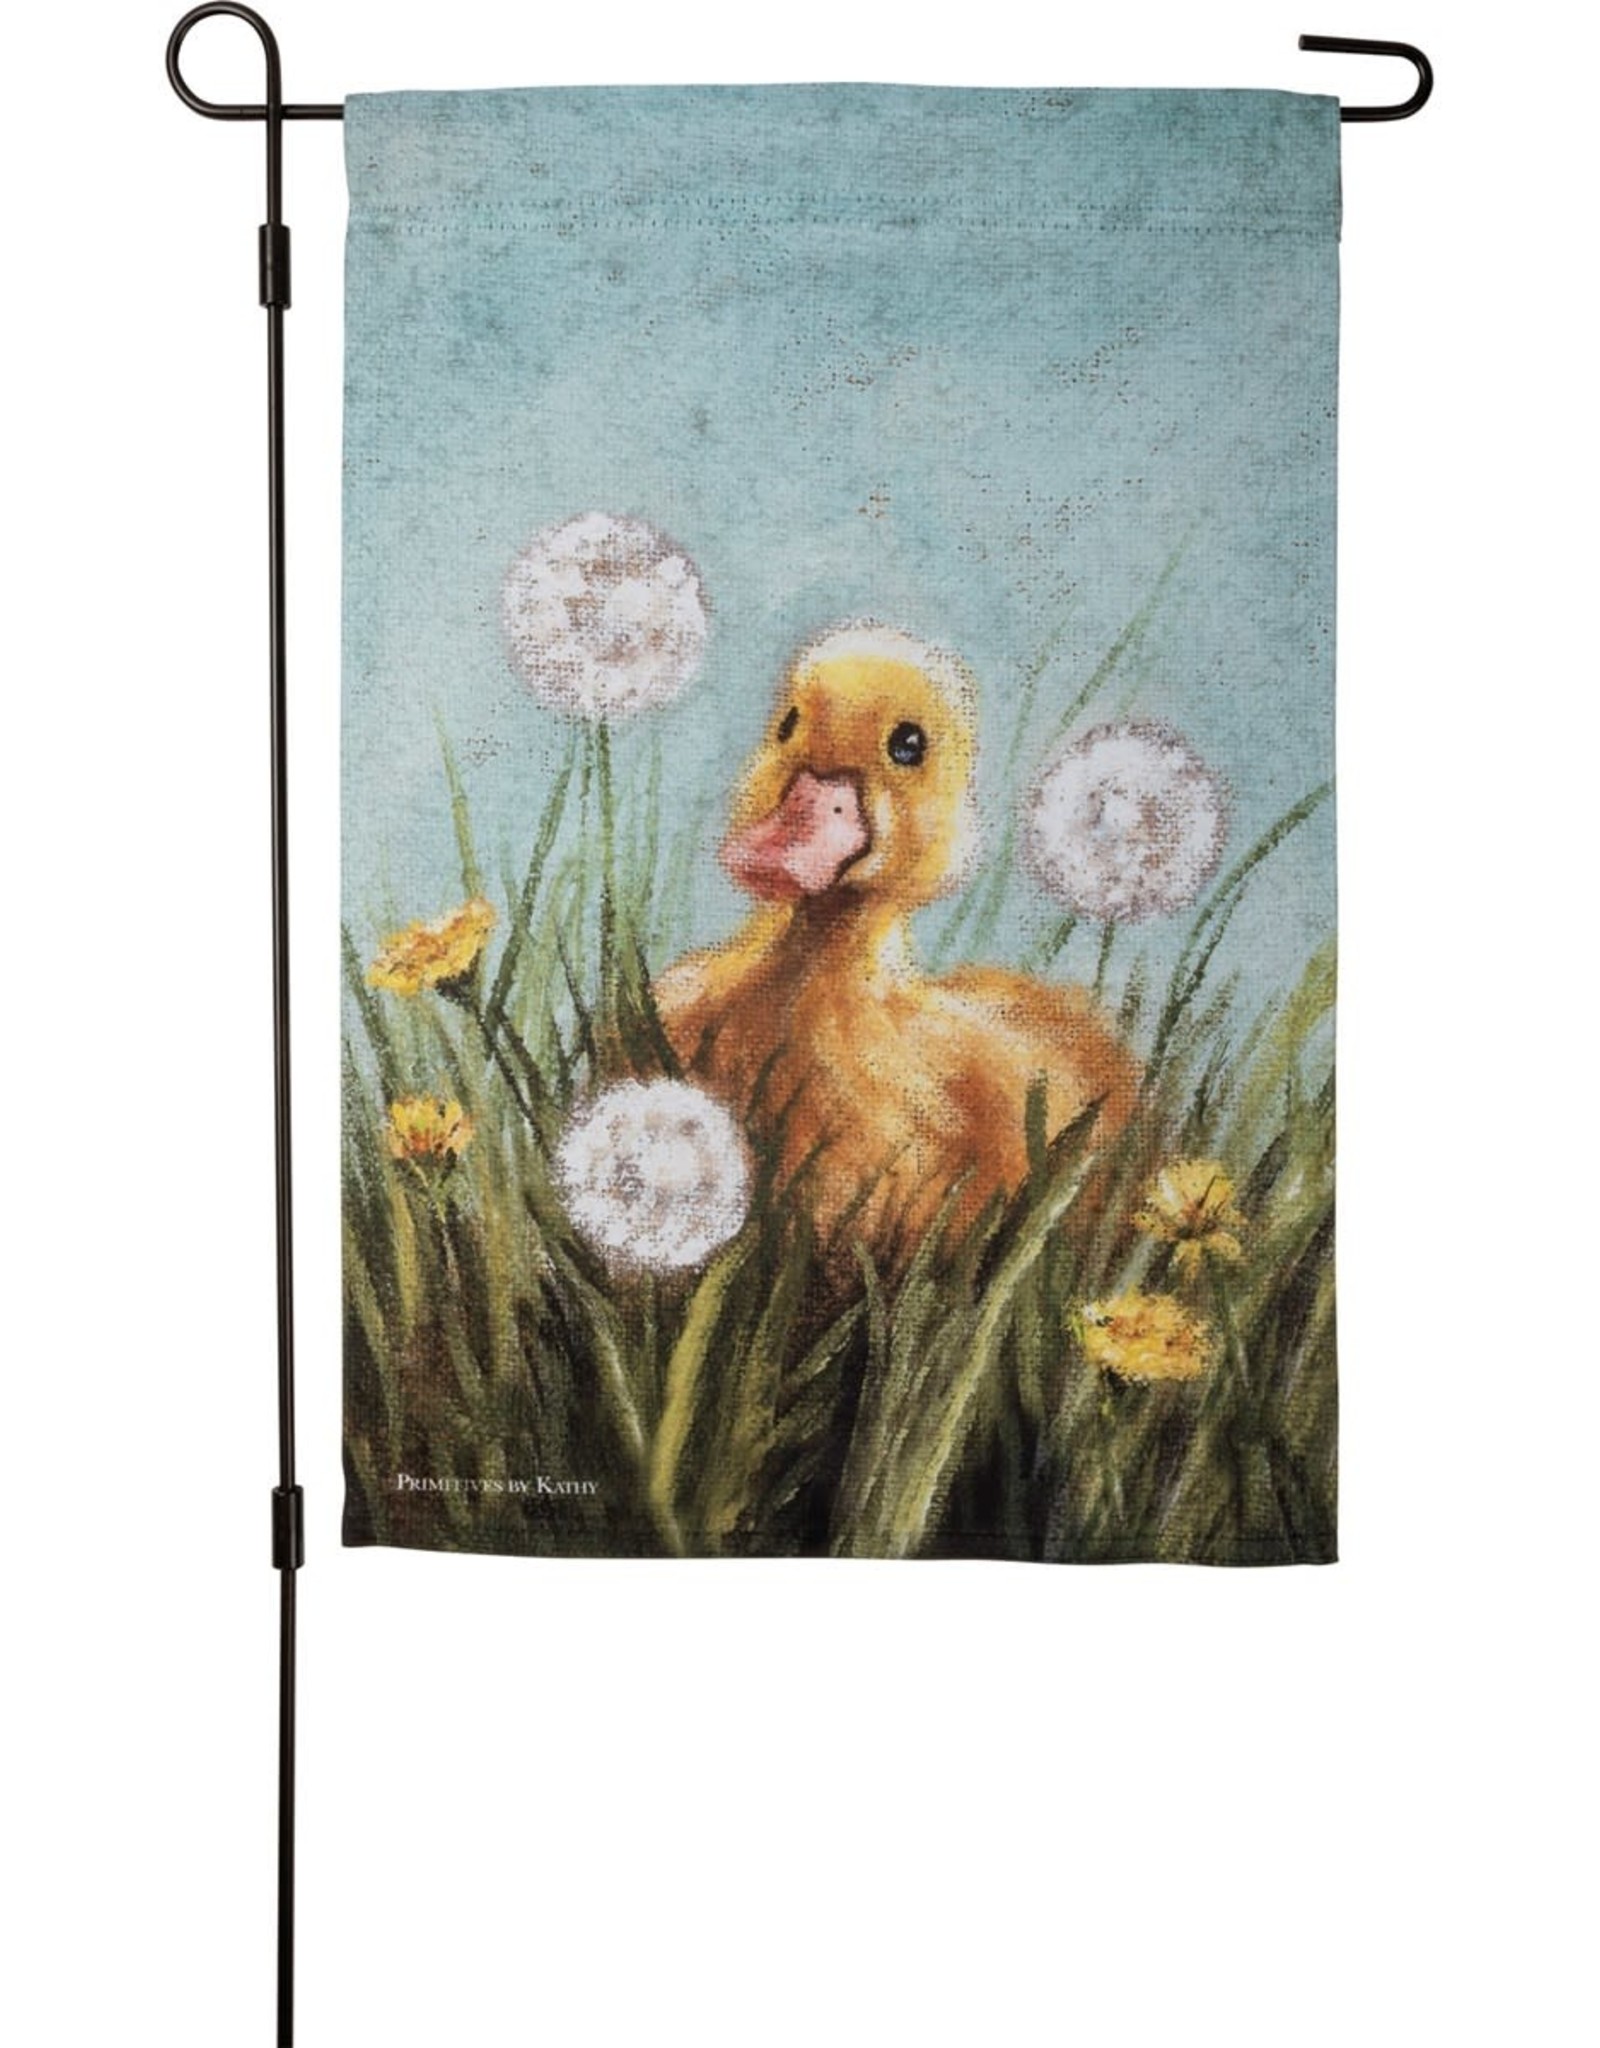 Primitives by Kathy Garden Flag - Baby Duck